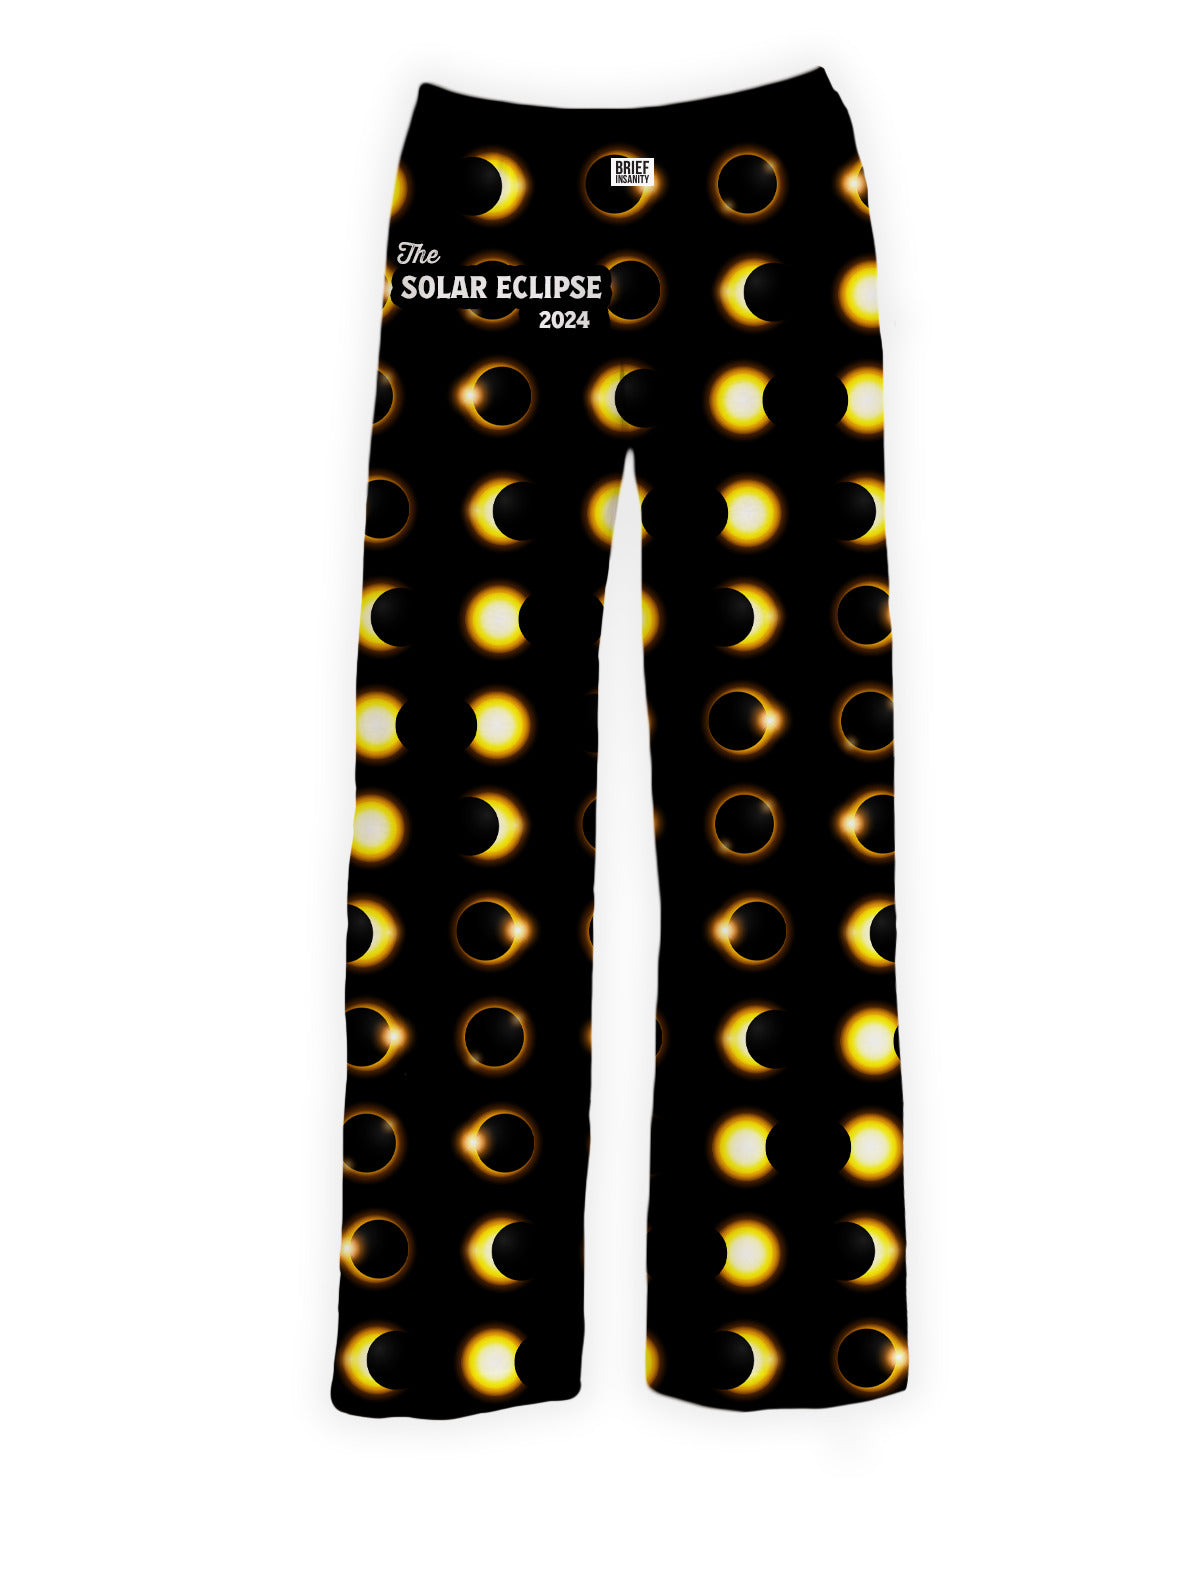 BRIEF INSANITY's Eclipse Timelapse Lounge Pants